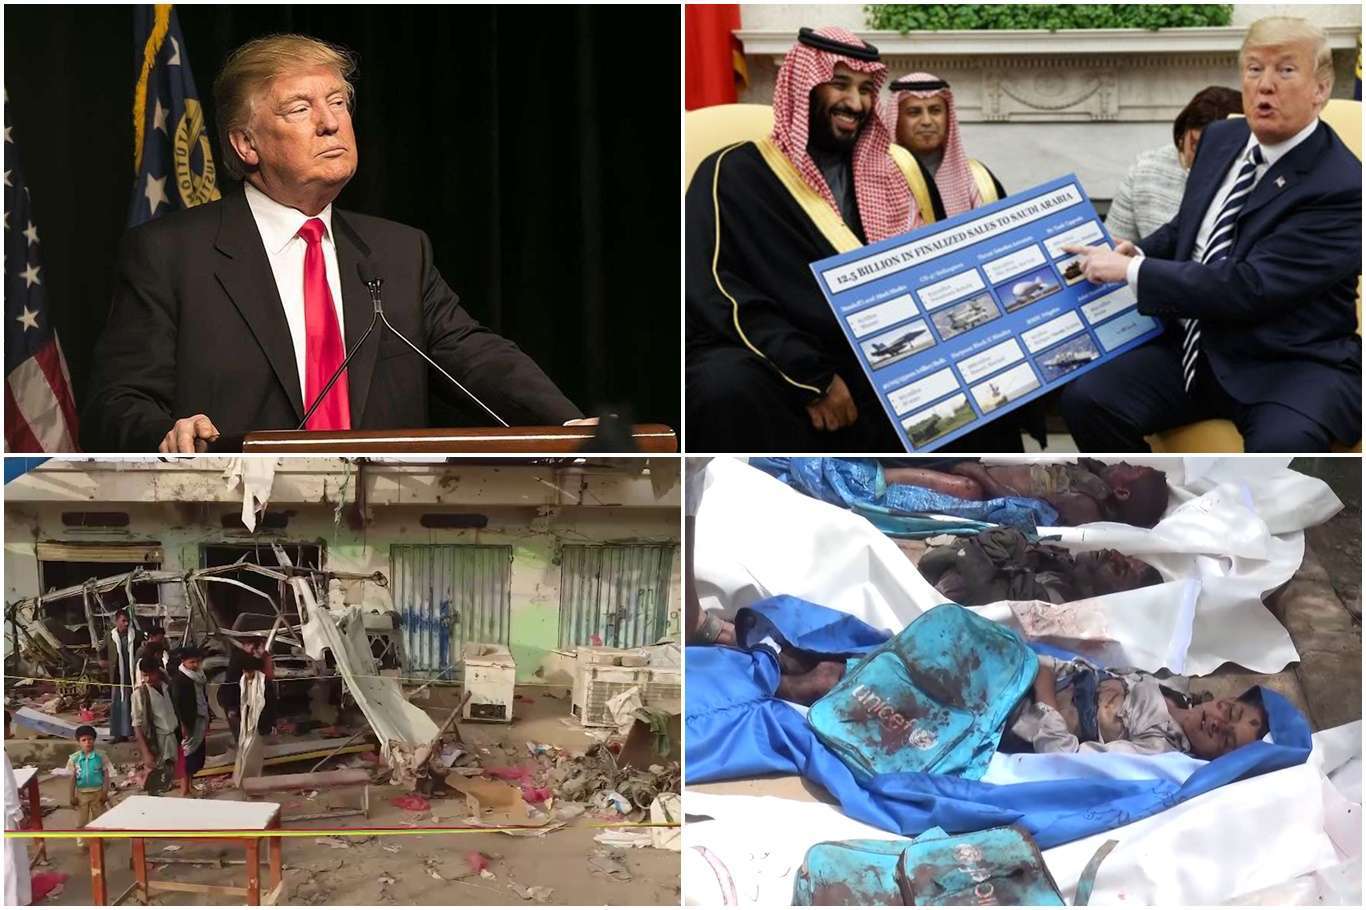 A Yemeni court issues death sentence for Trump, Salman for Dhahyan massacre